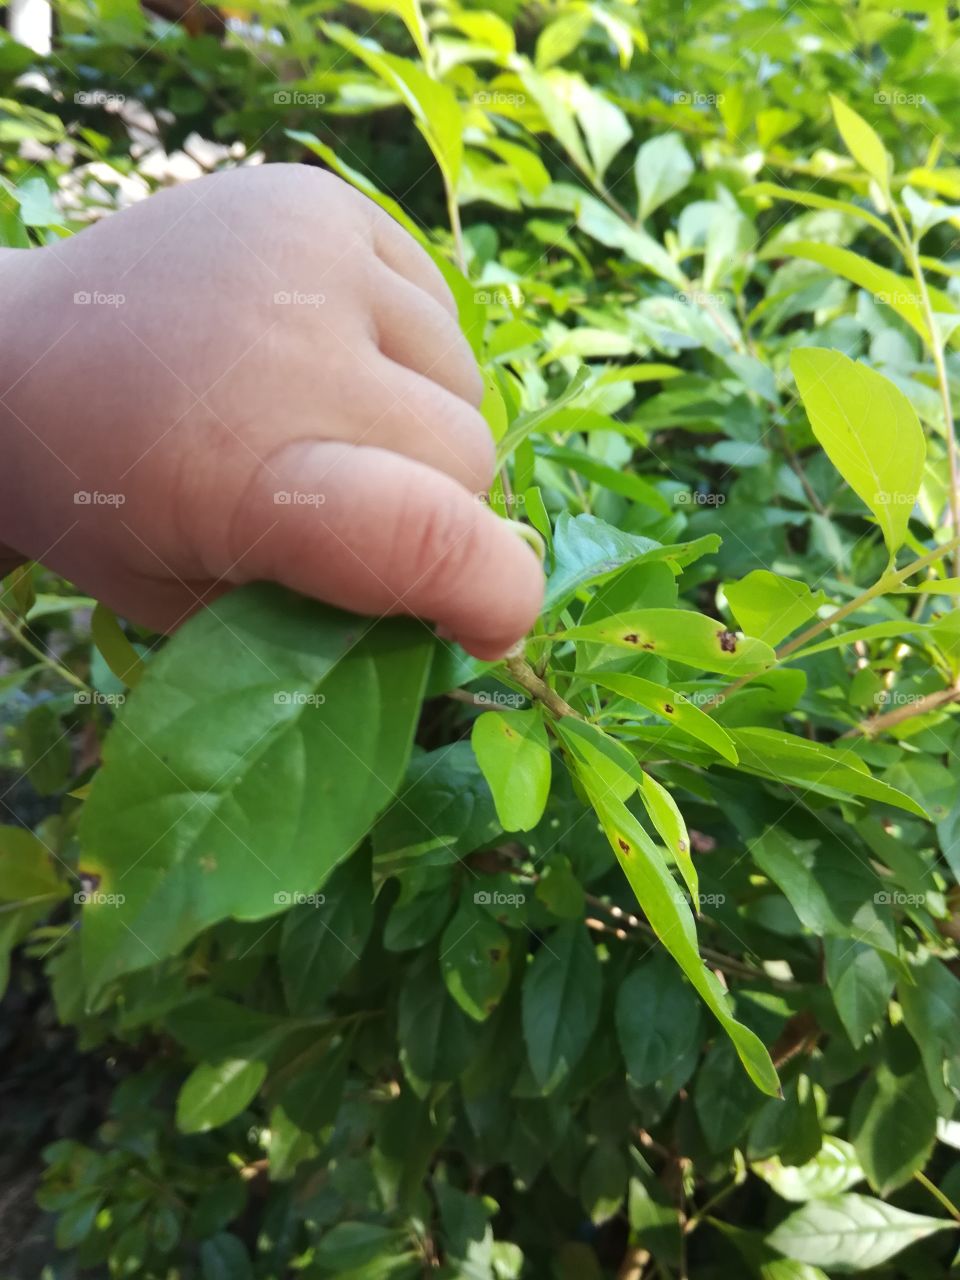 baby hand with greeny leaves